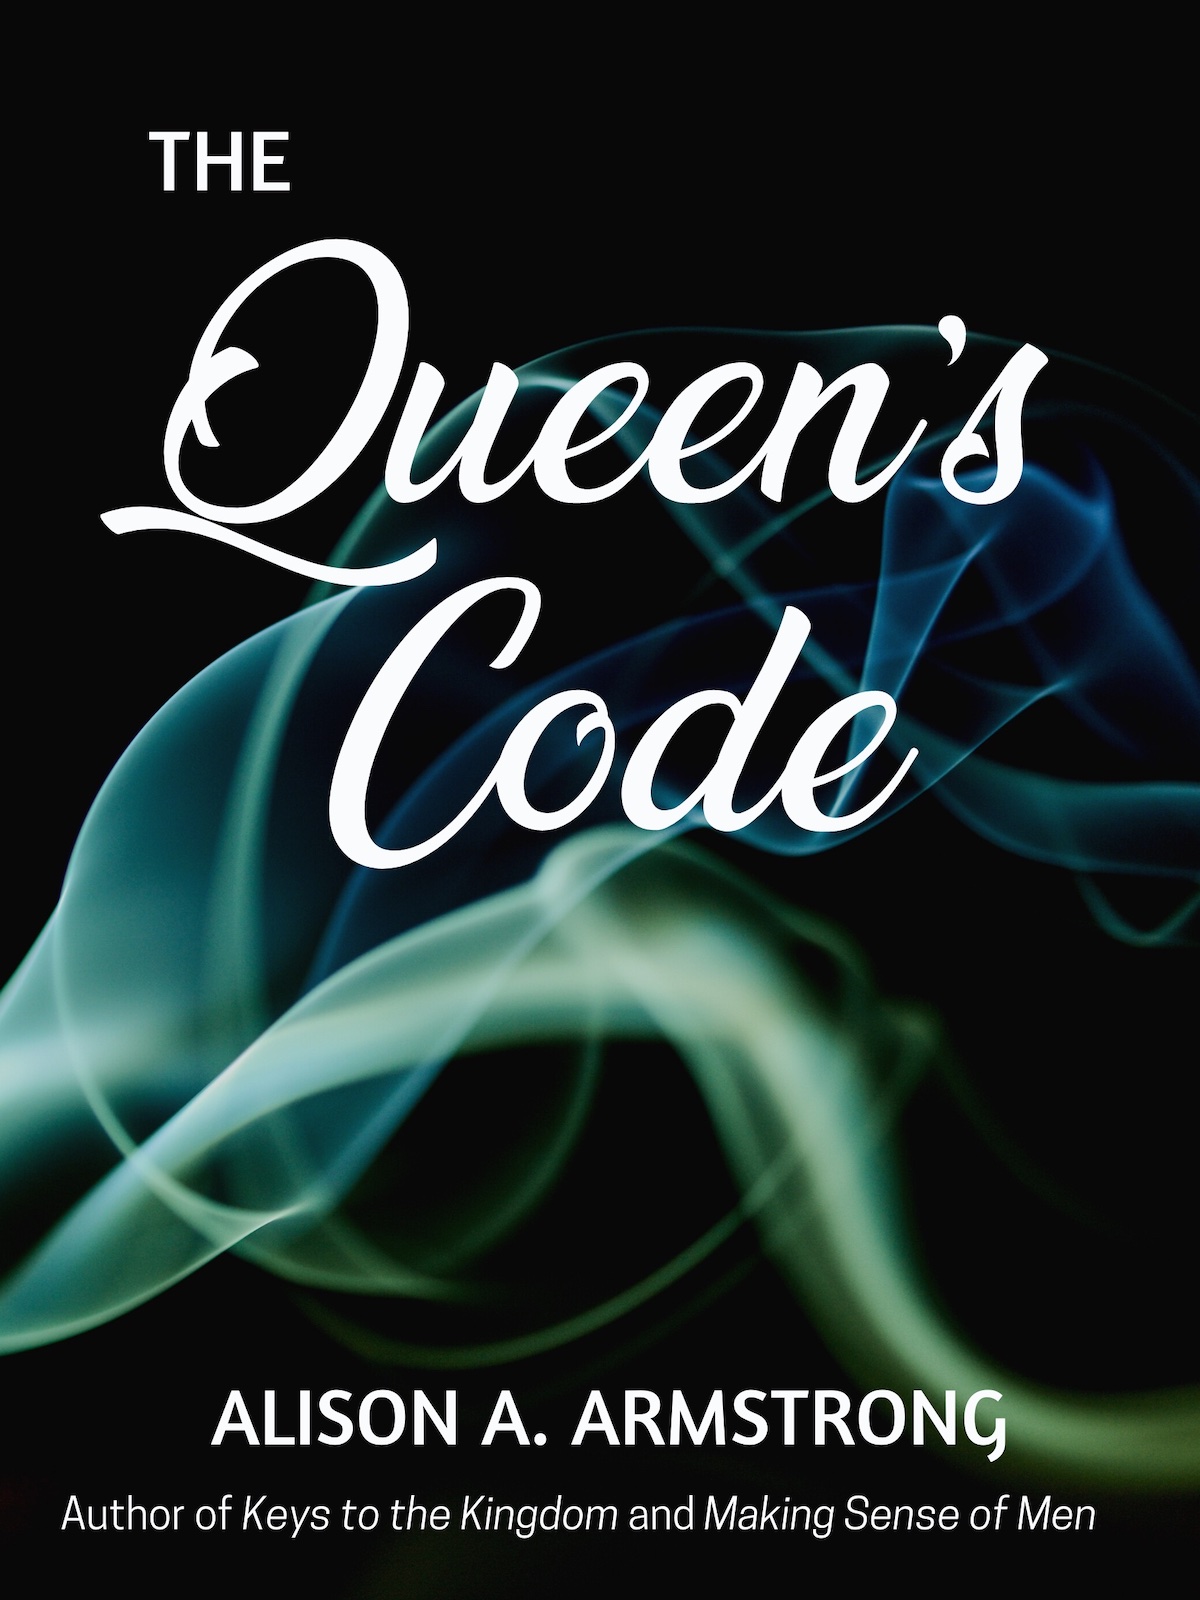 The Queen's Code by Alison A. Armstrong, Author of Keys to the Kingdom and Making Sense of Men